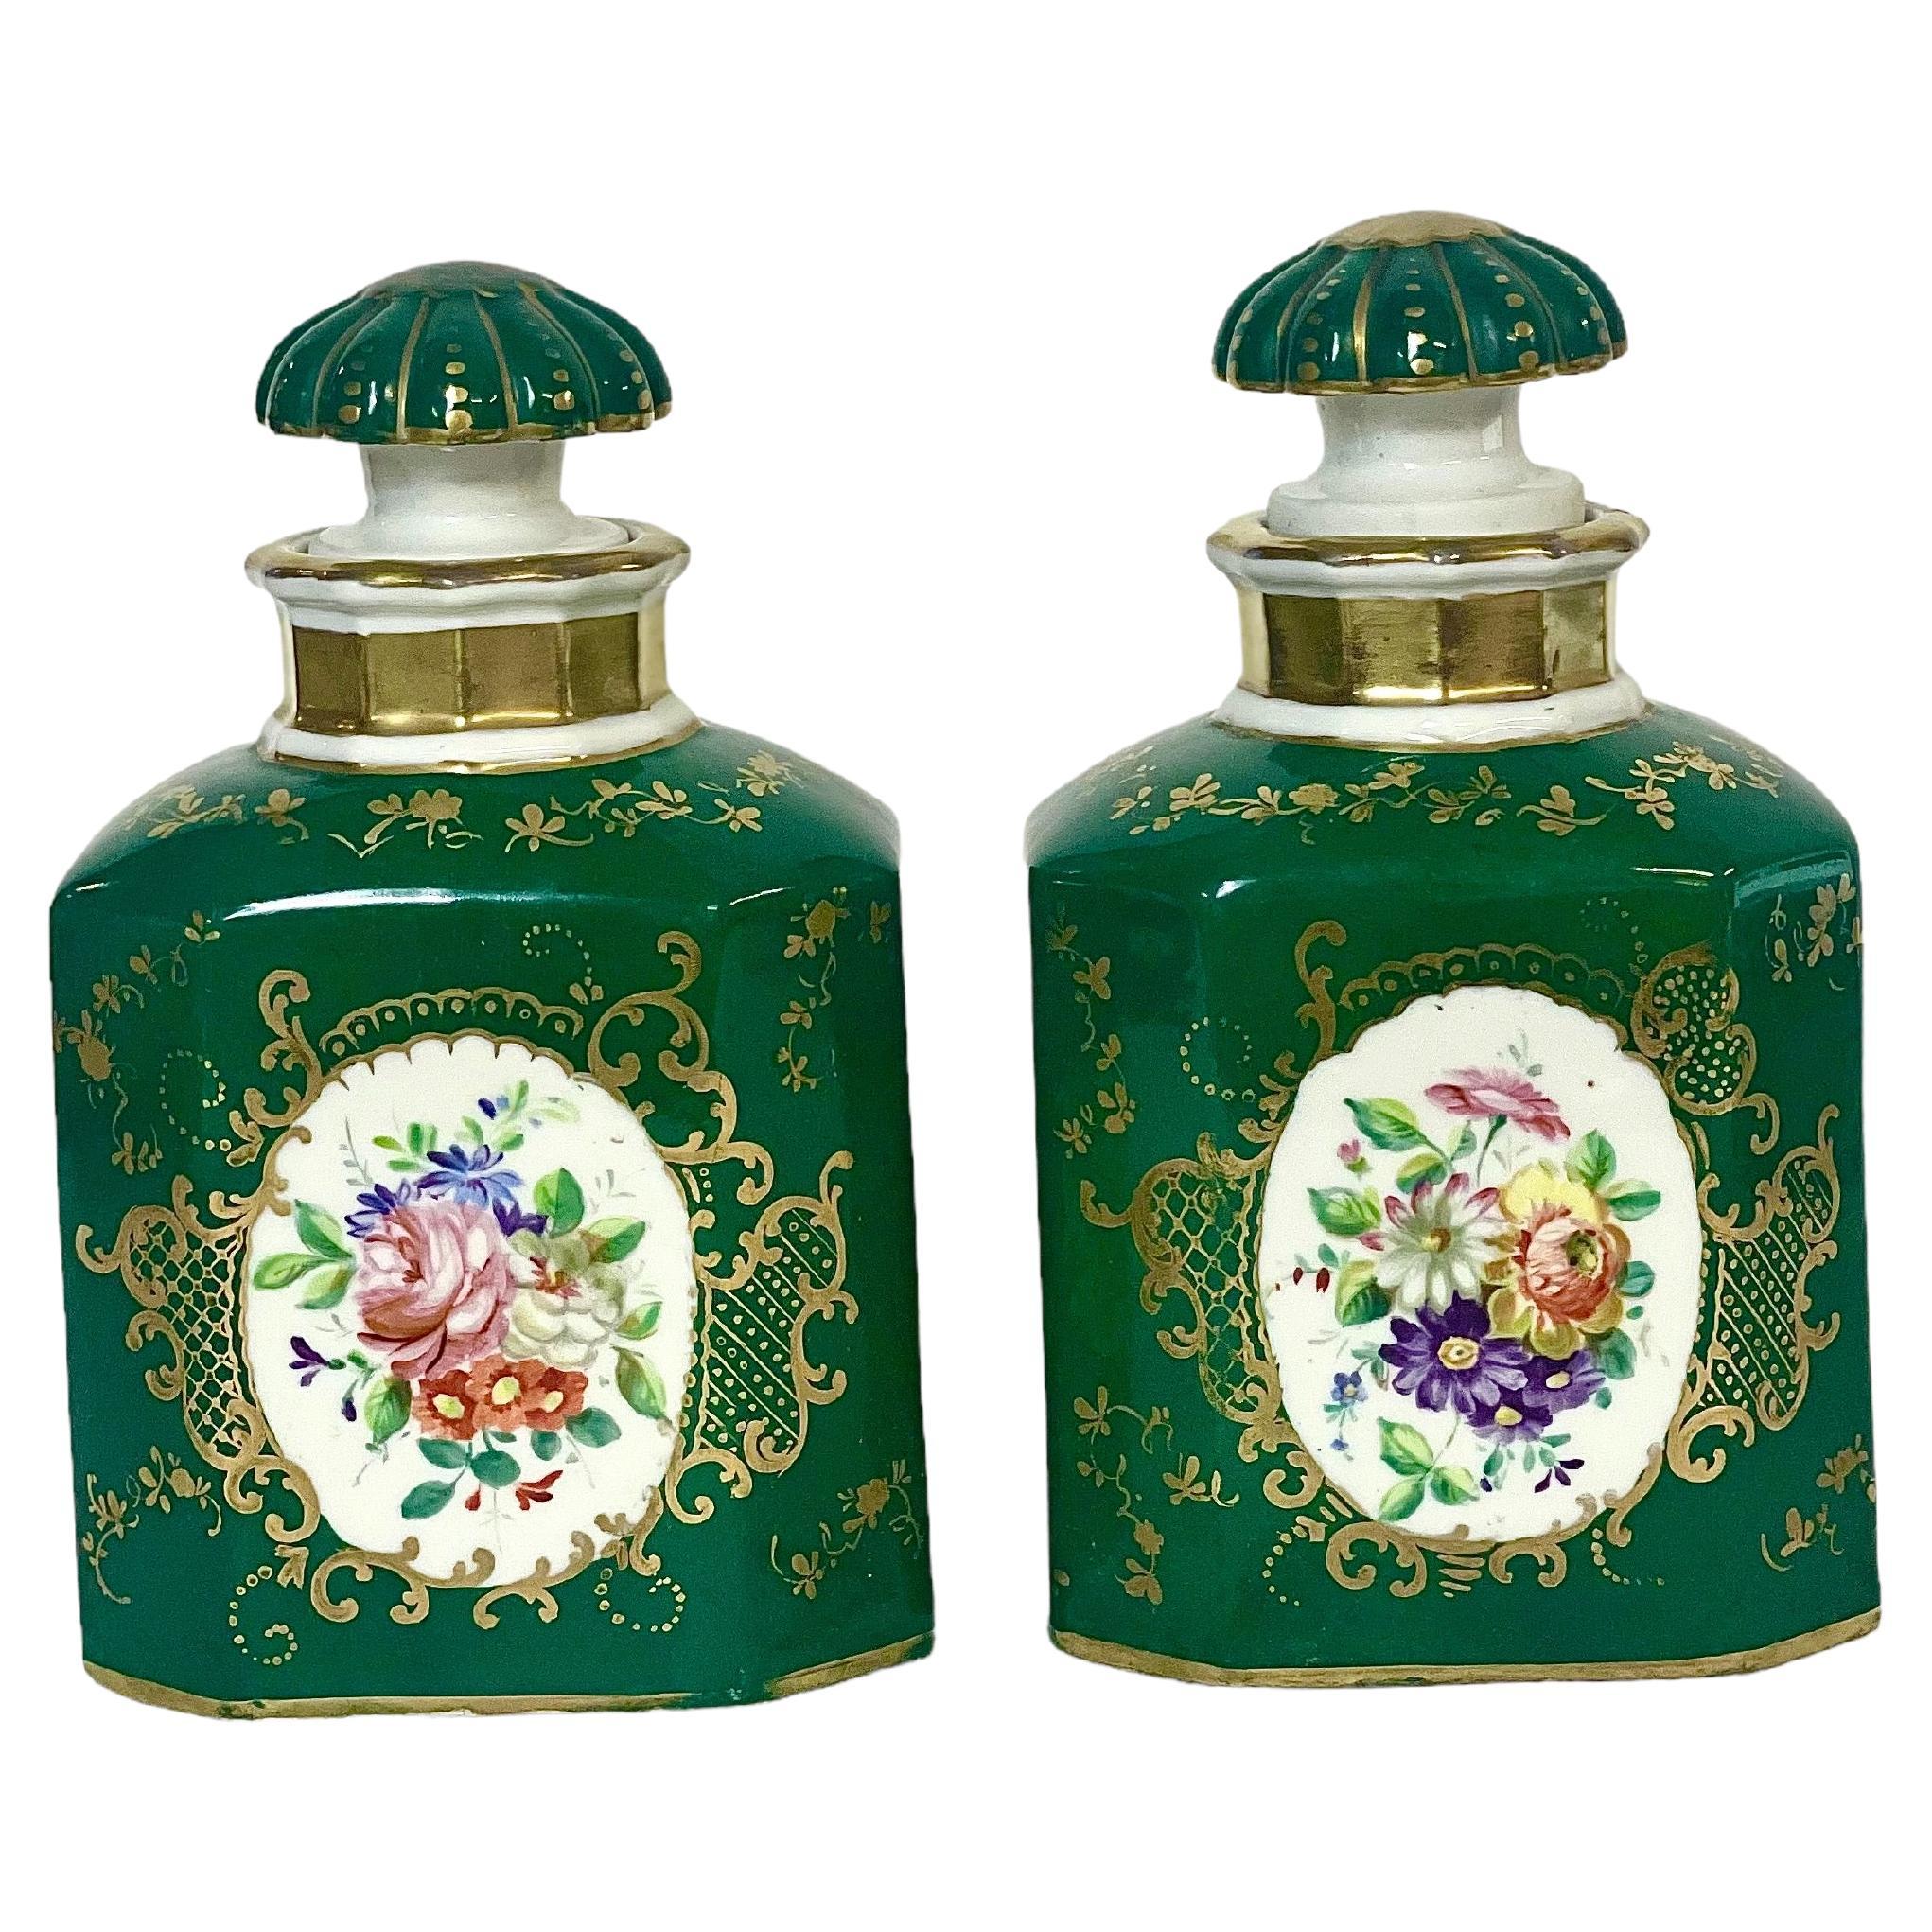 19th Century Pair of Paris Porcelain Stoppered Bottles or Flacons